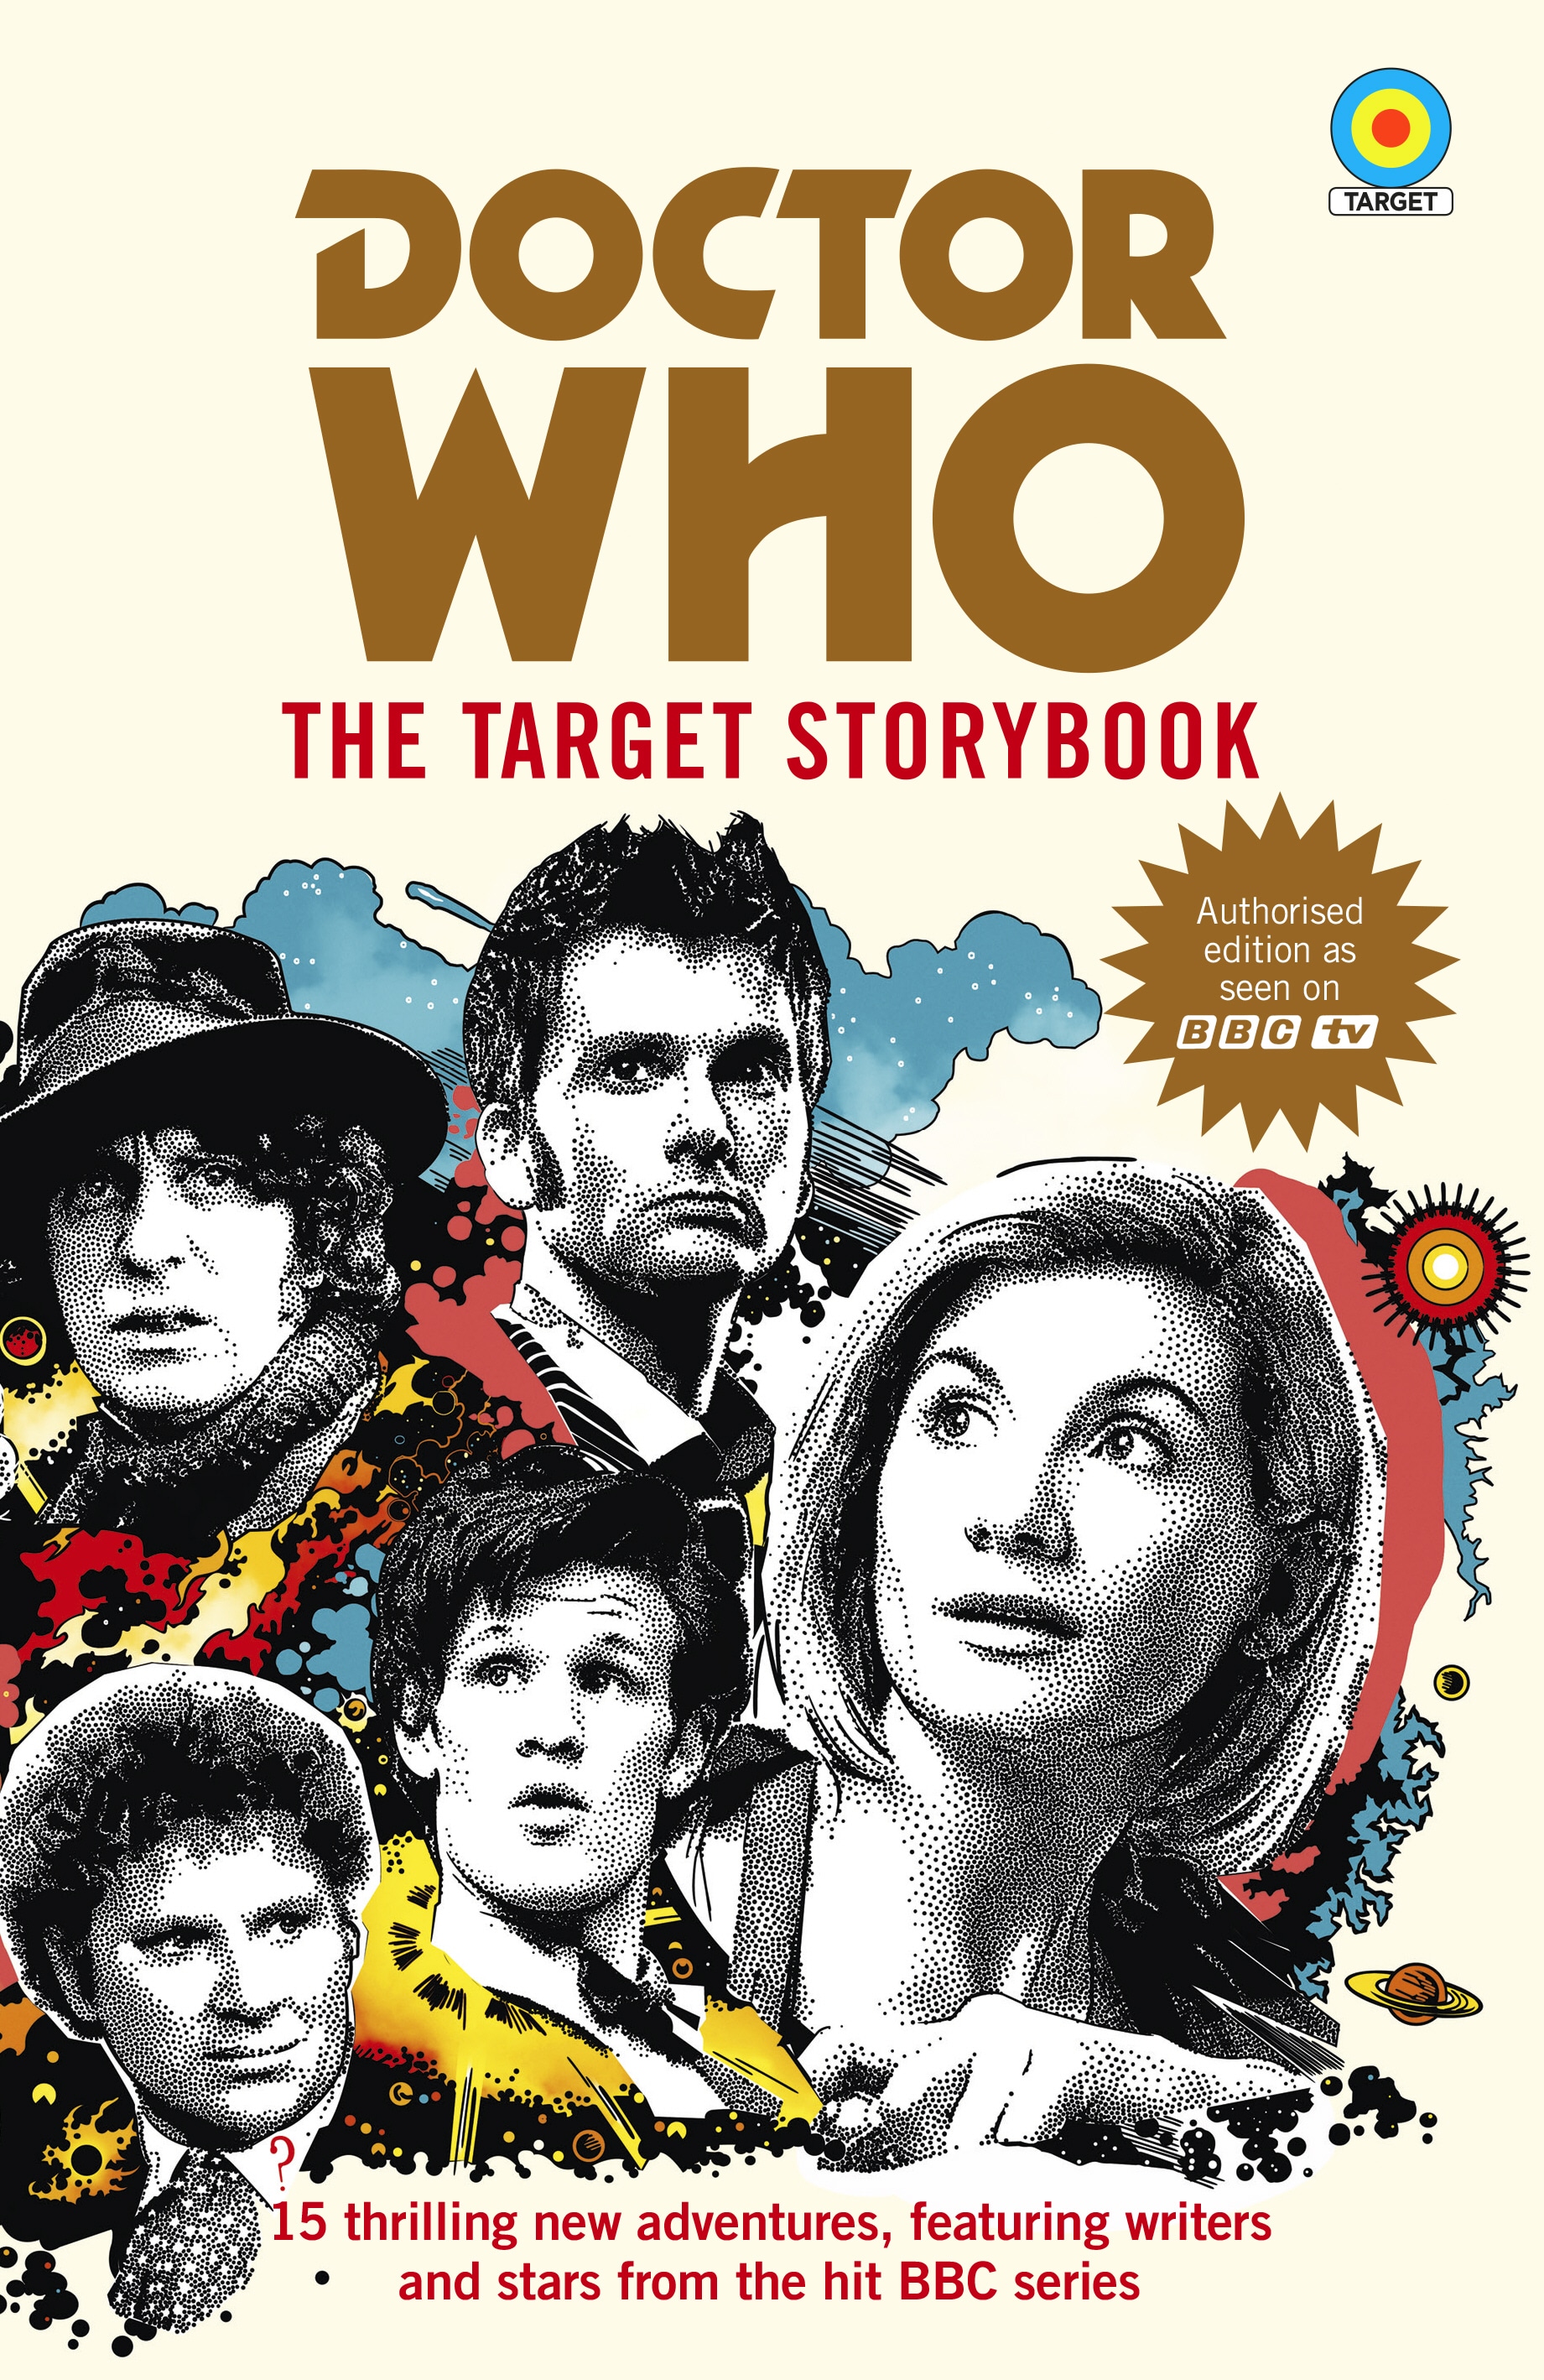 Book “Doctor Who: The Target Storybook” by Terrance Dicks — October 24, 2019